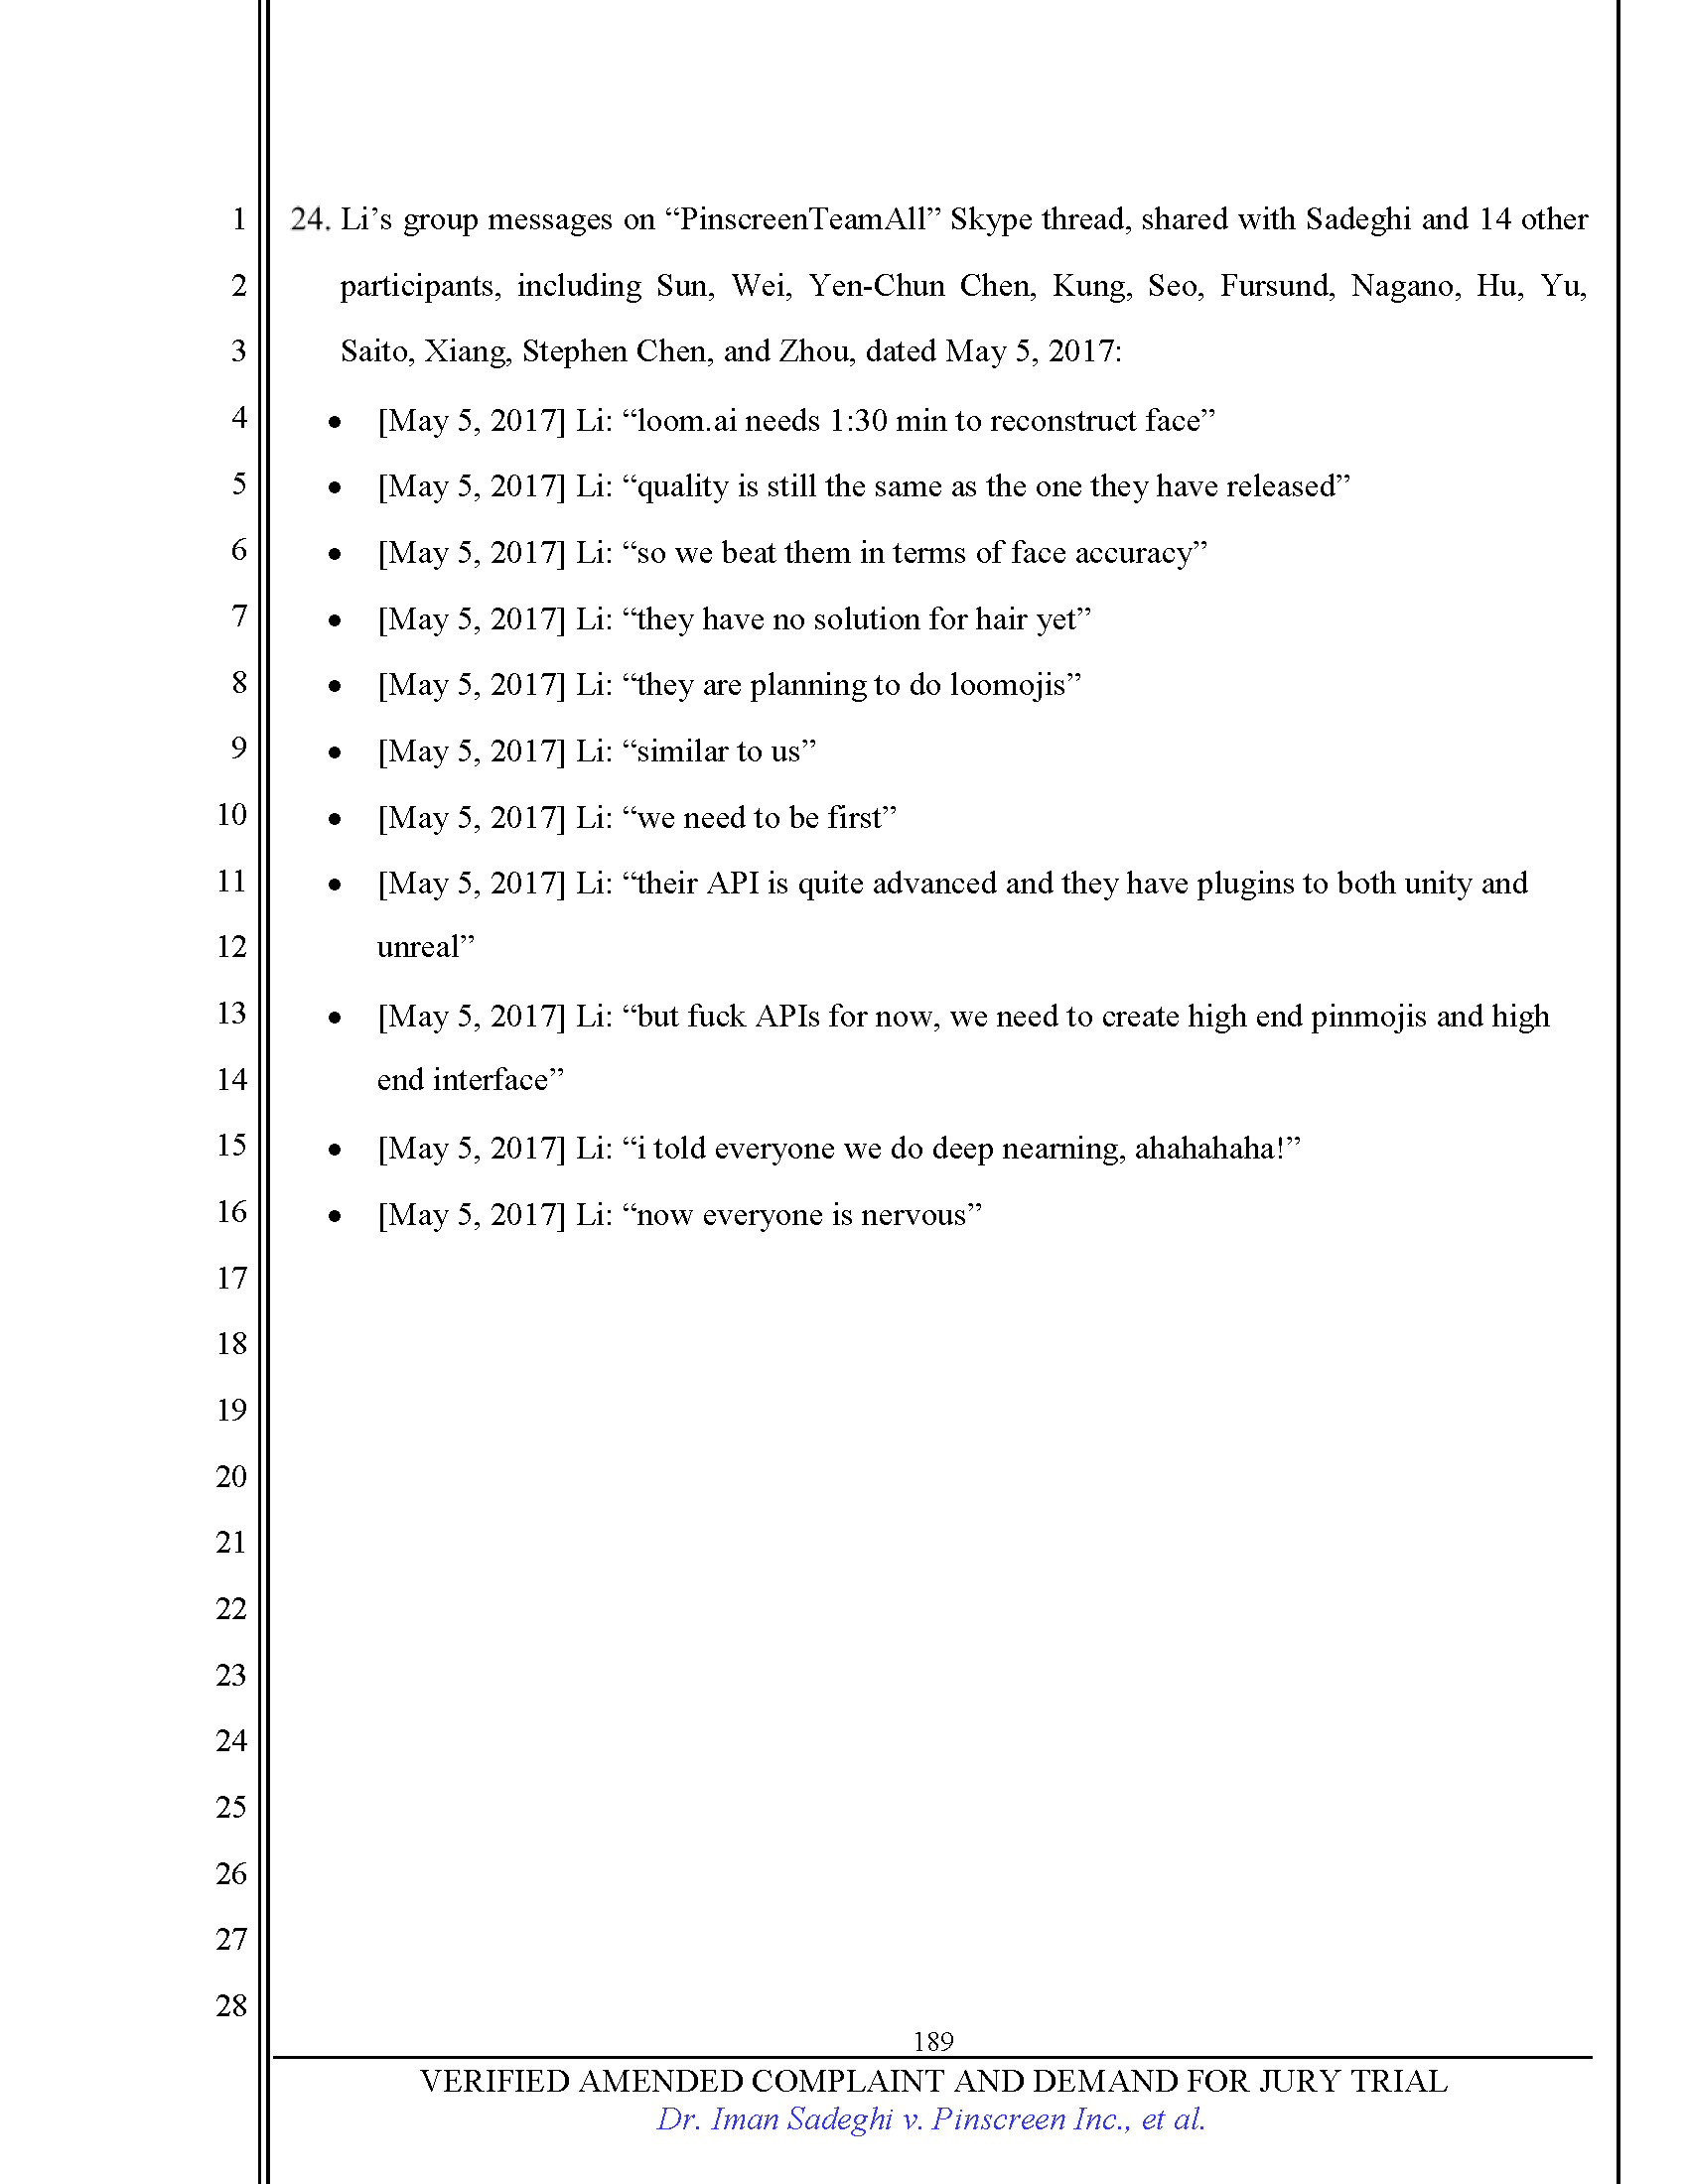 First Amended Complaint (FAC) Page 189